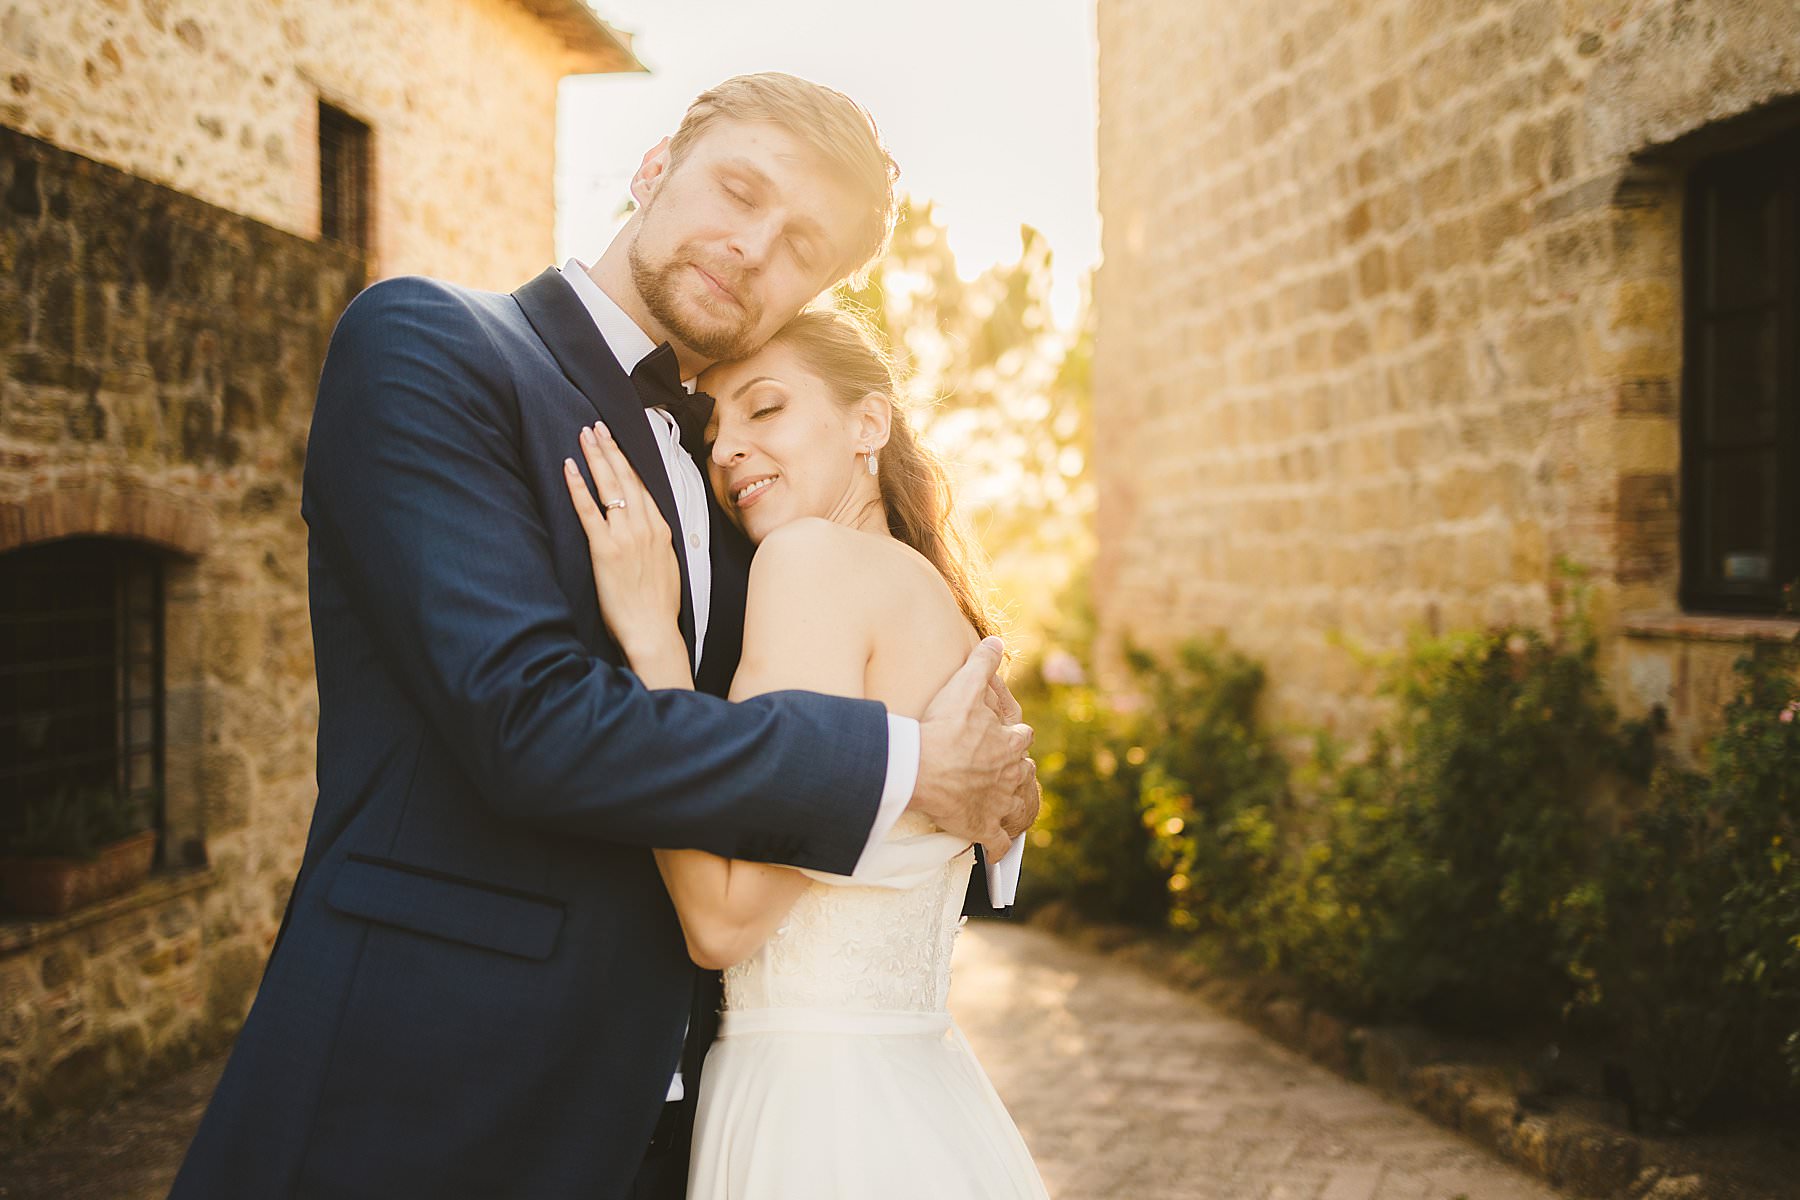 Romantic and lovely bride and groom wedding portrait at Tenuta di Papena